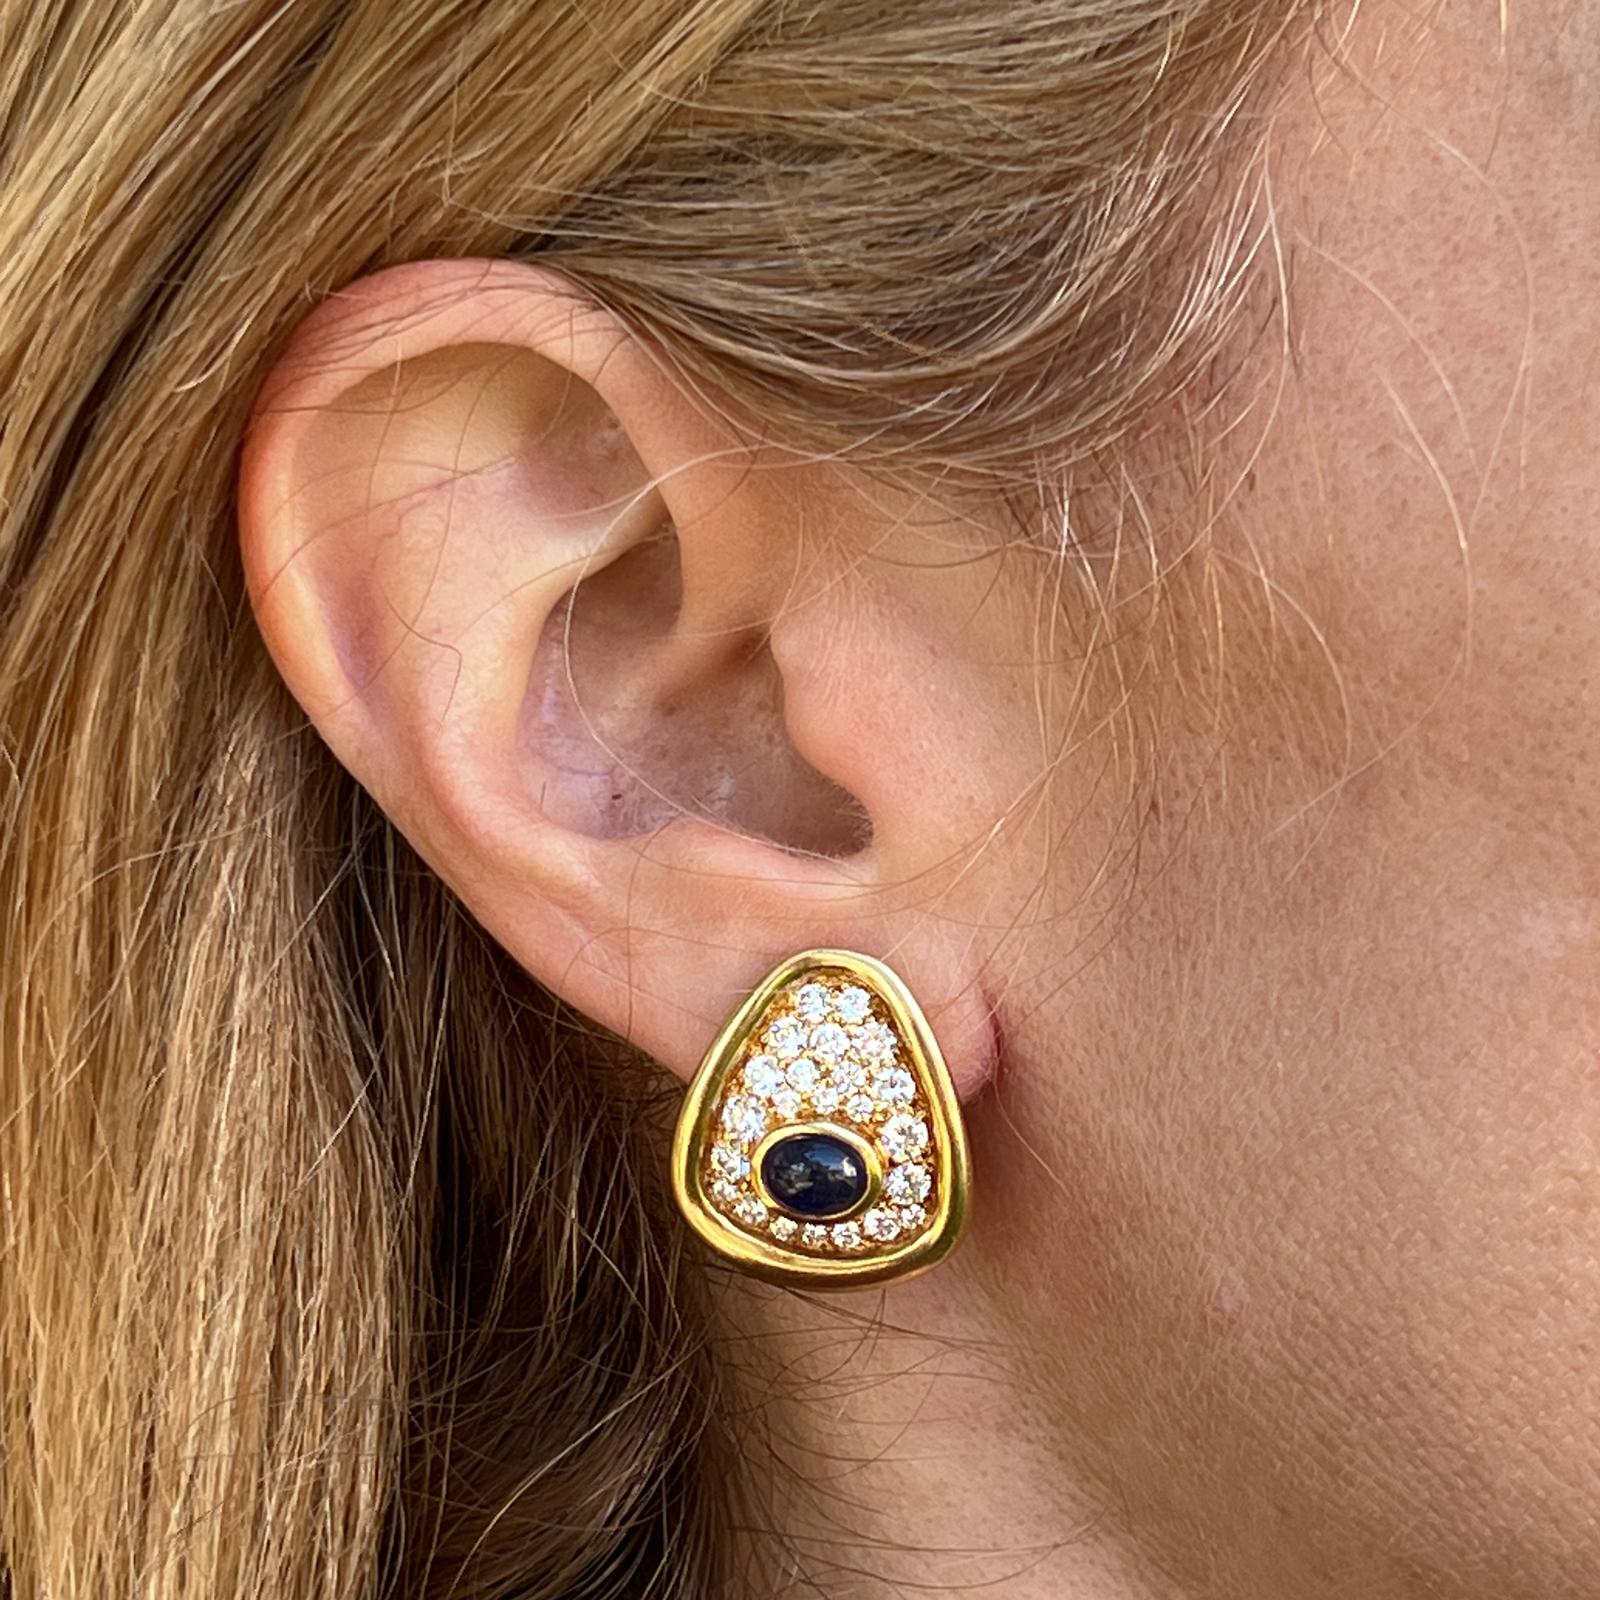 Beautiful diamond and sapphire earrings handcrafted in 18 karat yellow gold. The earrings feature 46 round brilliant cut diamonds weighing approximately 2.00 carat total weight, and two cabochon blue sapphires weighing approximately 2.40 CTW. The